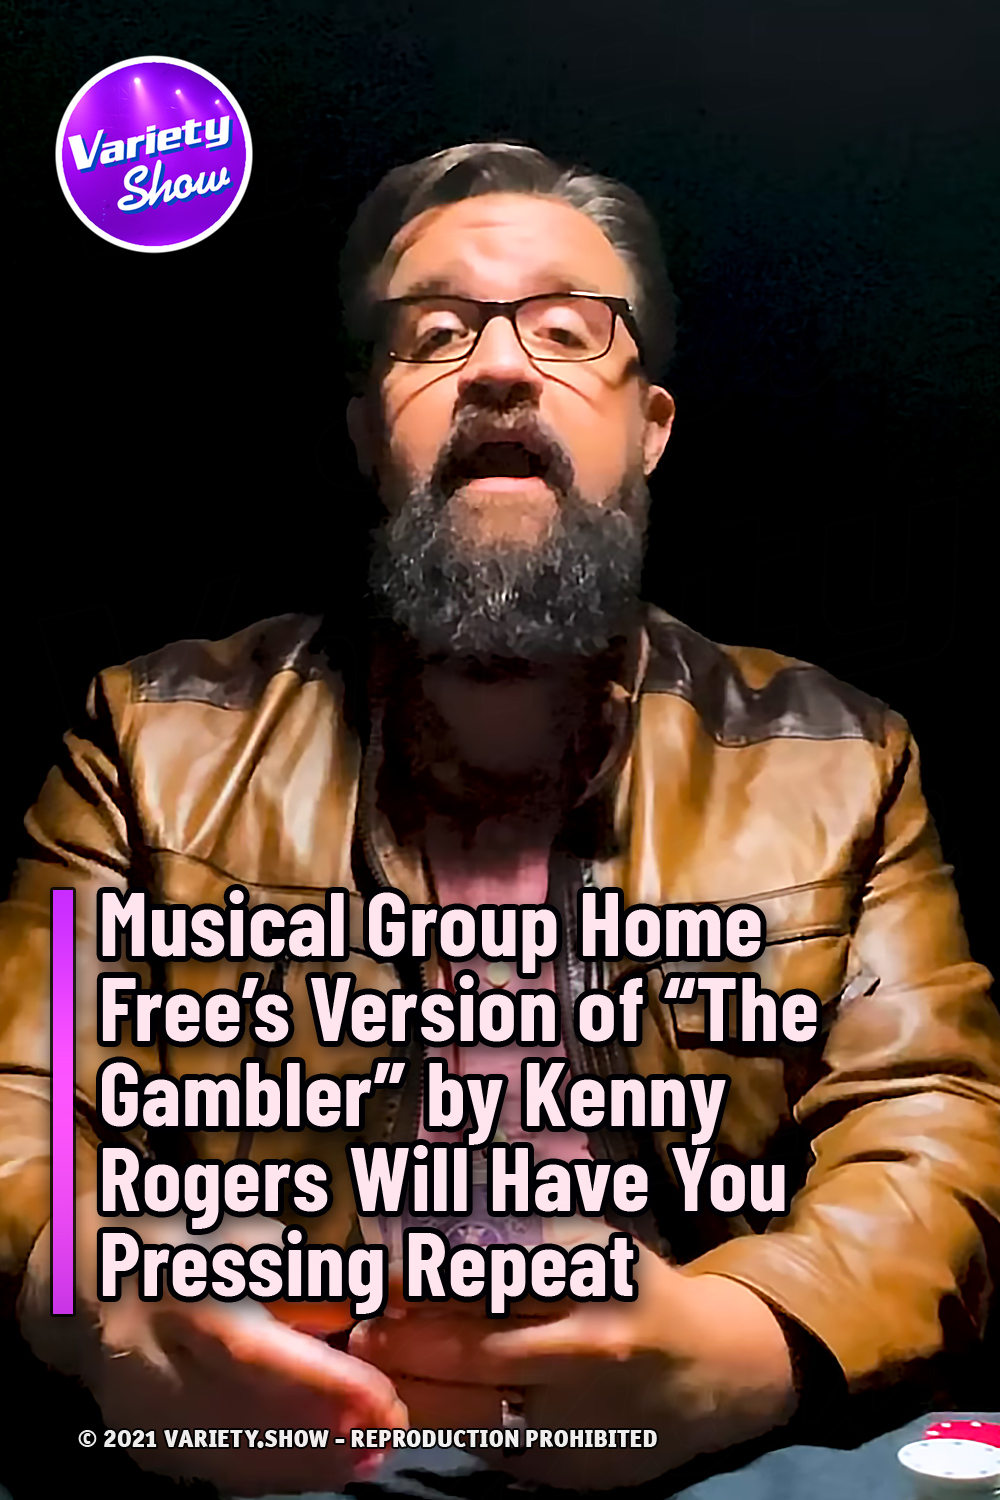 Musical Group Home Free’s Version of “The Gambler” by Kenny Rogers Will Have You Pressing Repeat